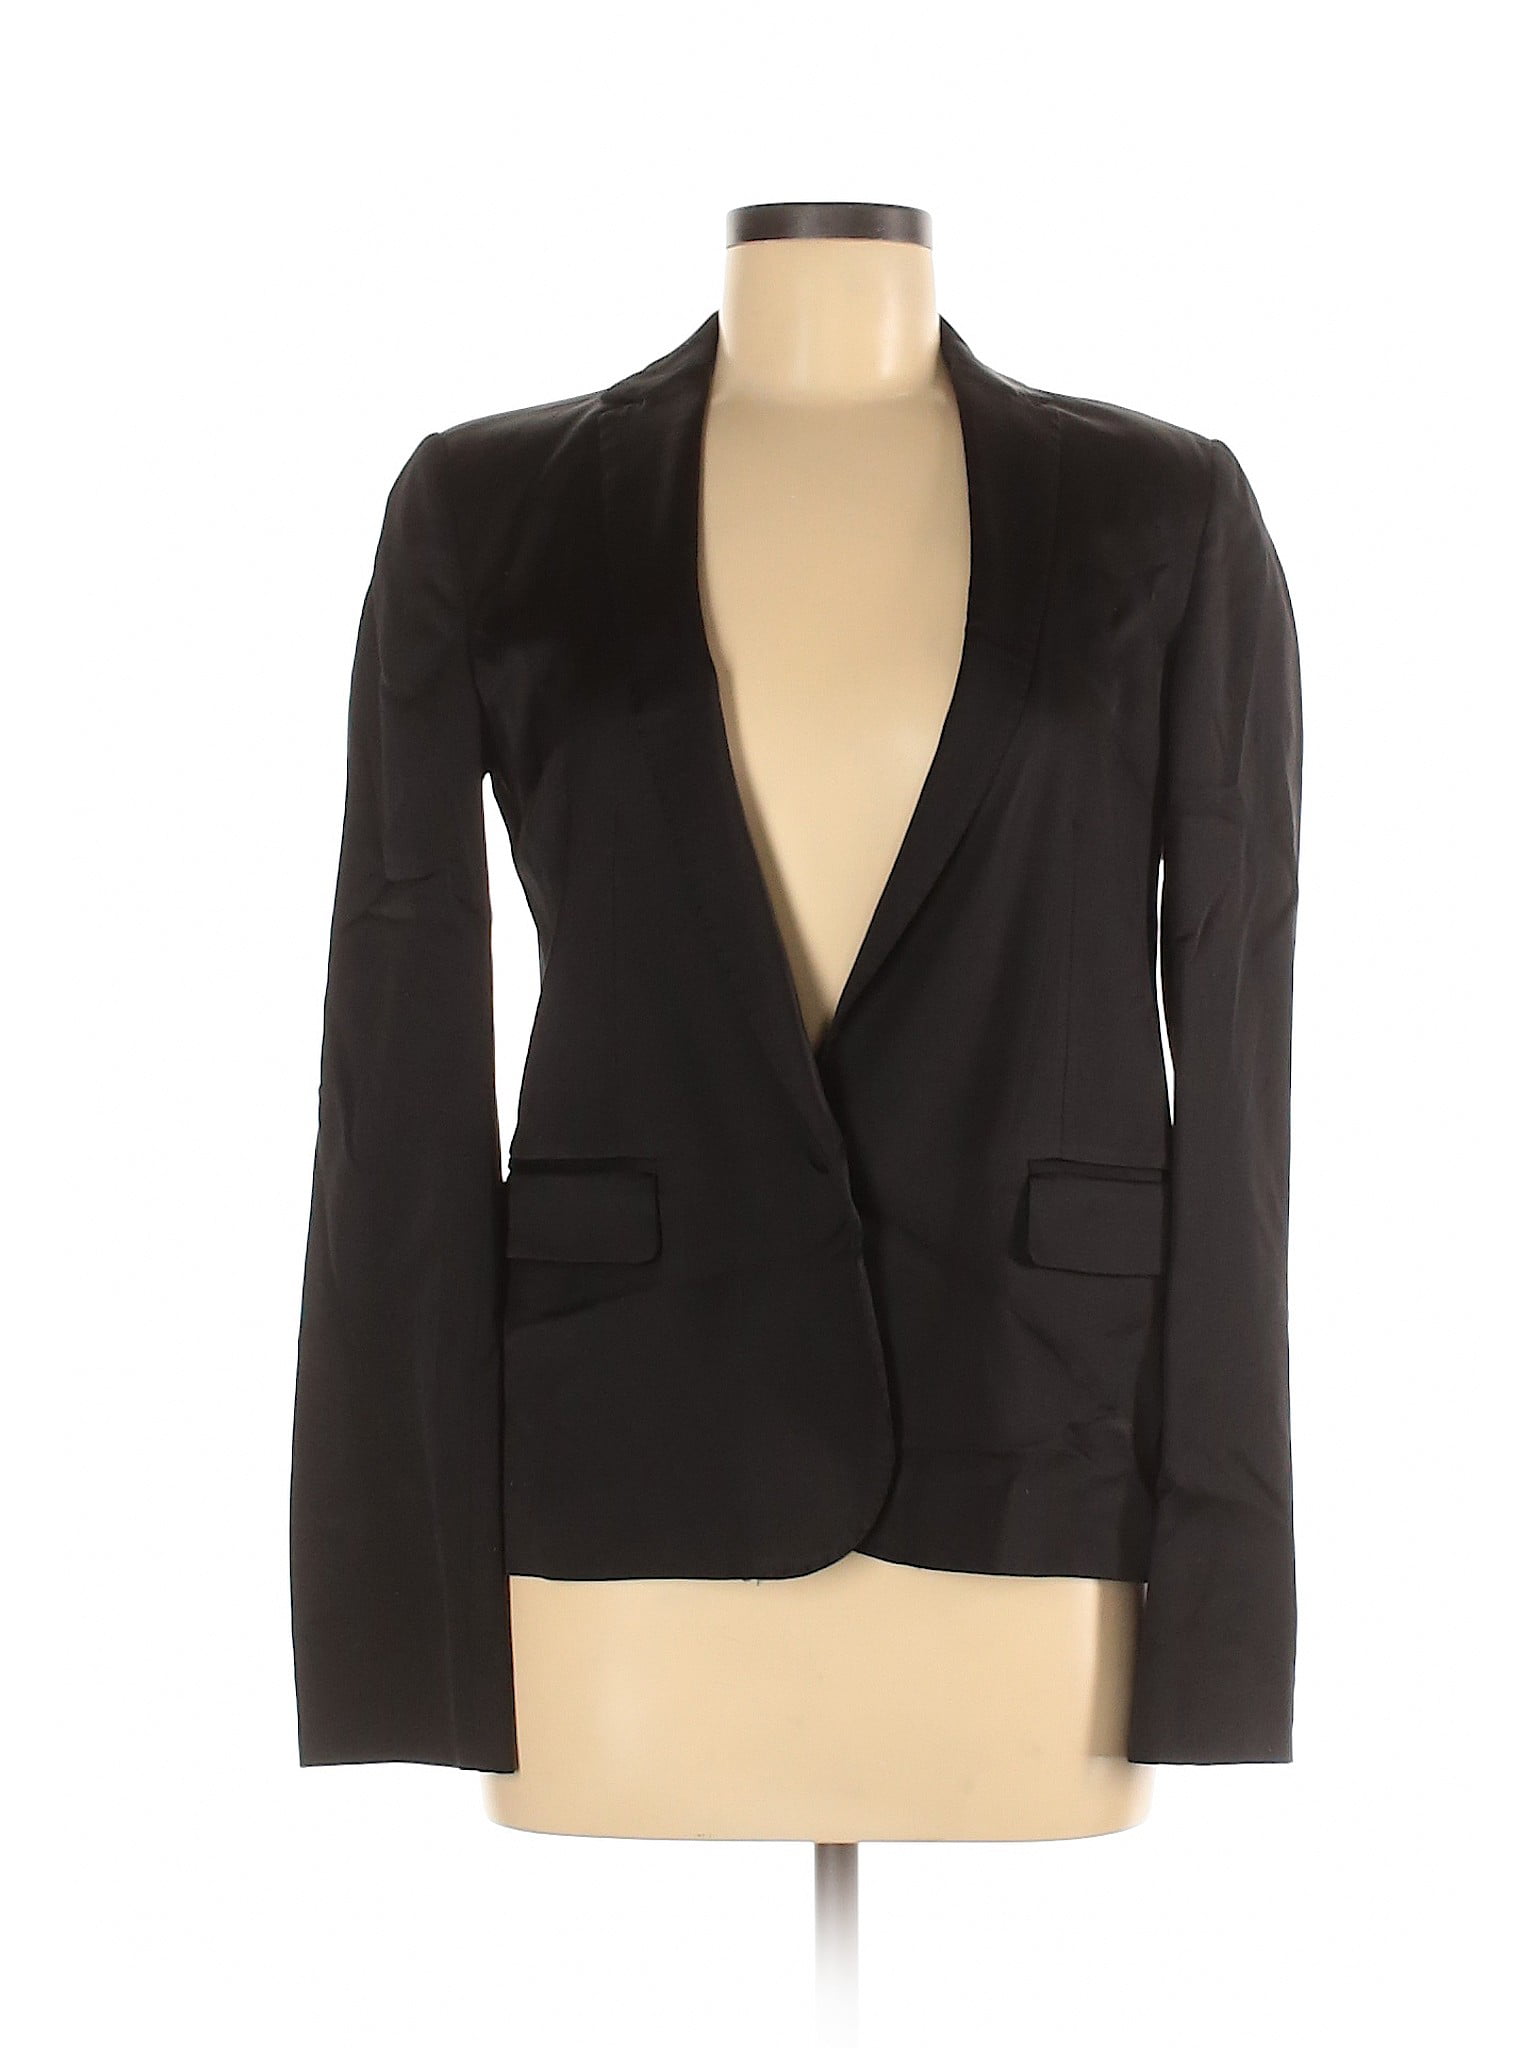 French Connection - Pre-Owned French Connection Women's Size 6 Blazer ...